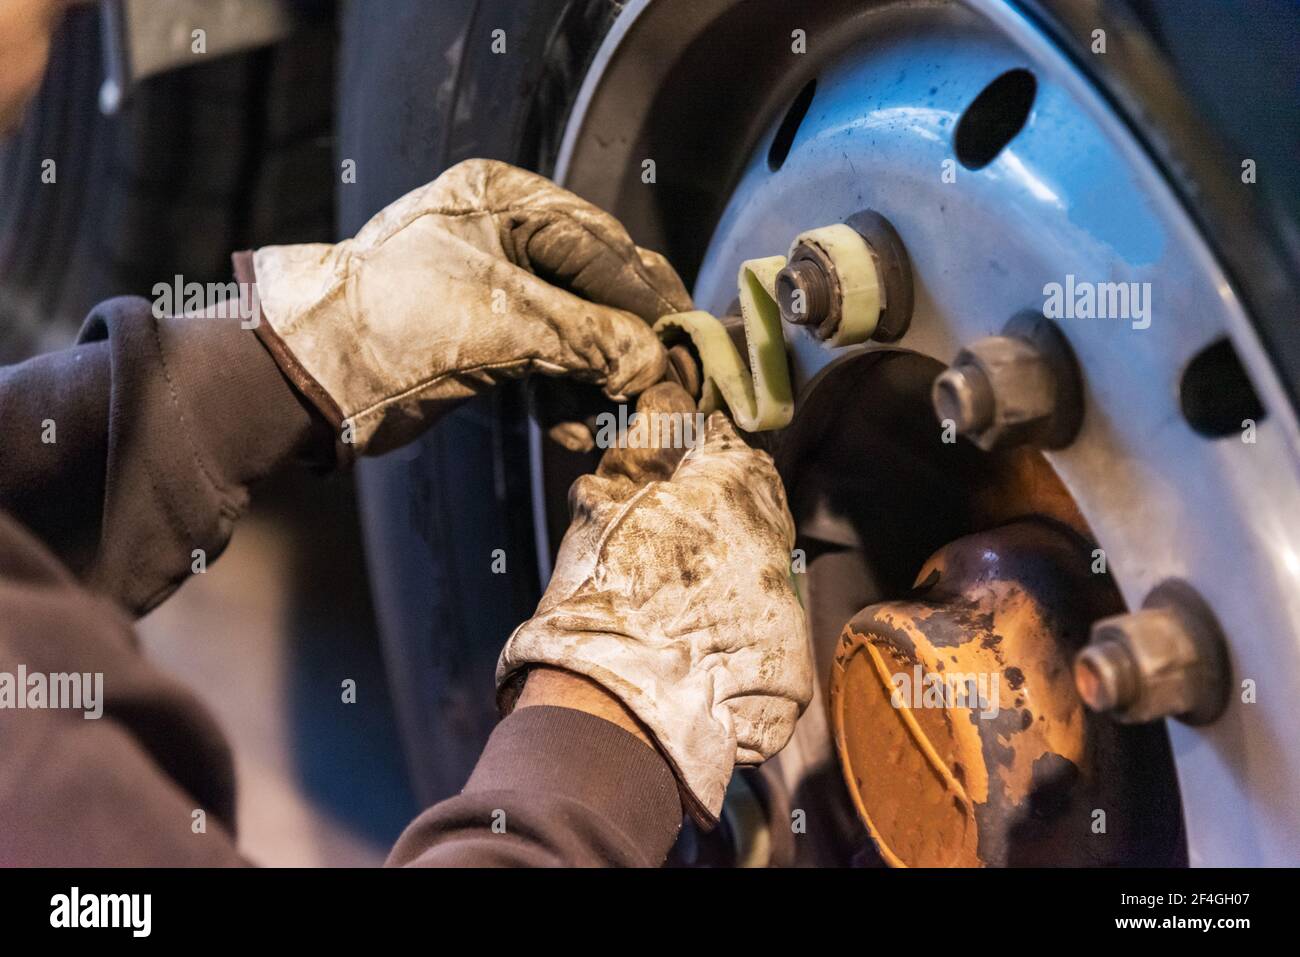 Tire workshop operator who uses a machine to mount or remove a truck wheel. Stock Photo